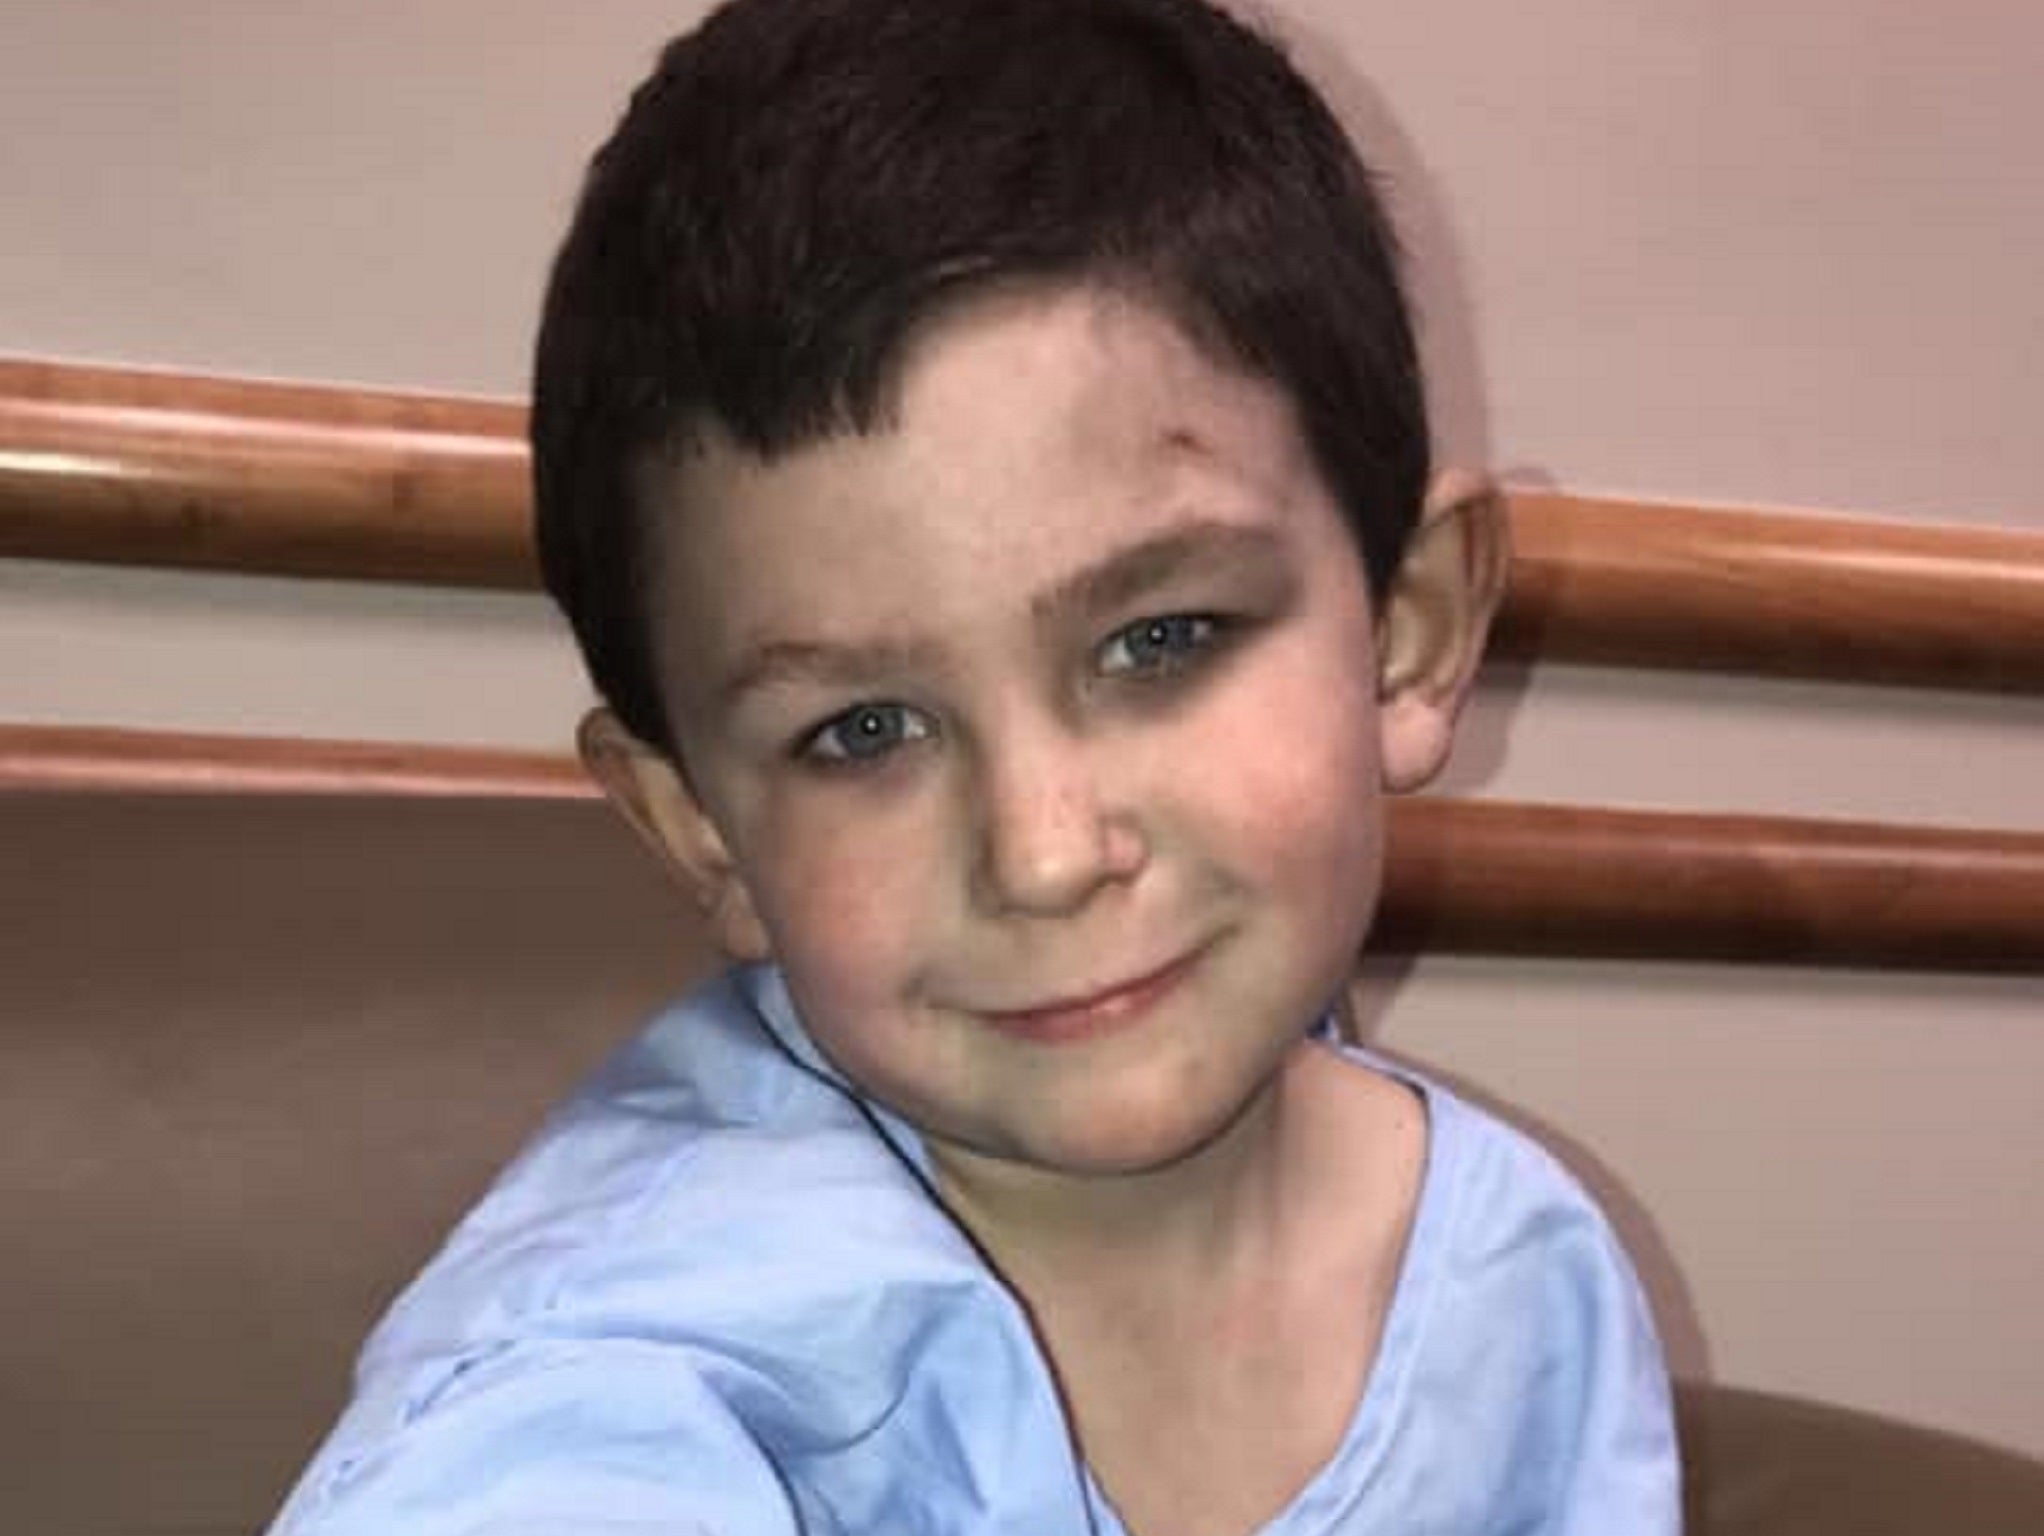 Five-year-old Noah Woods has been made an honorary firefighter and saving his family from a blaze at their home in Bastow County, Georgia, US, on 9 February, 2020.